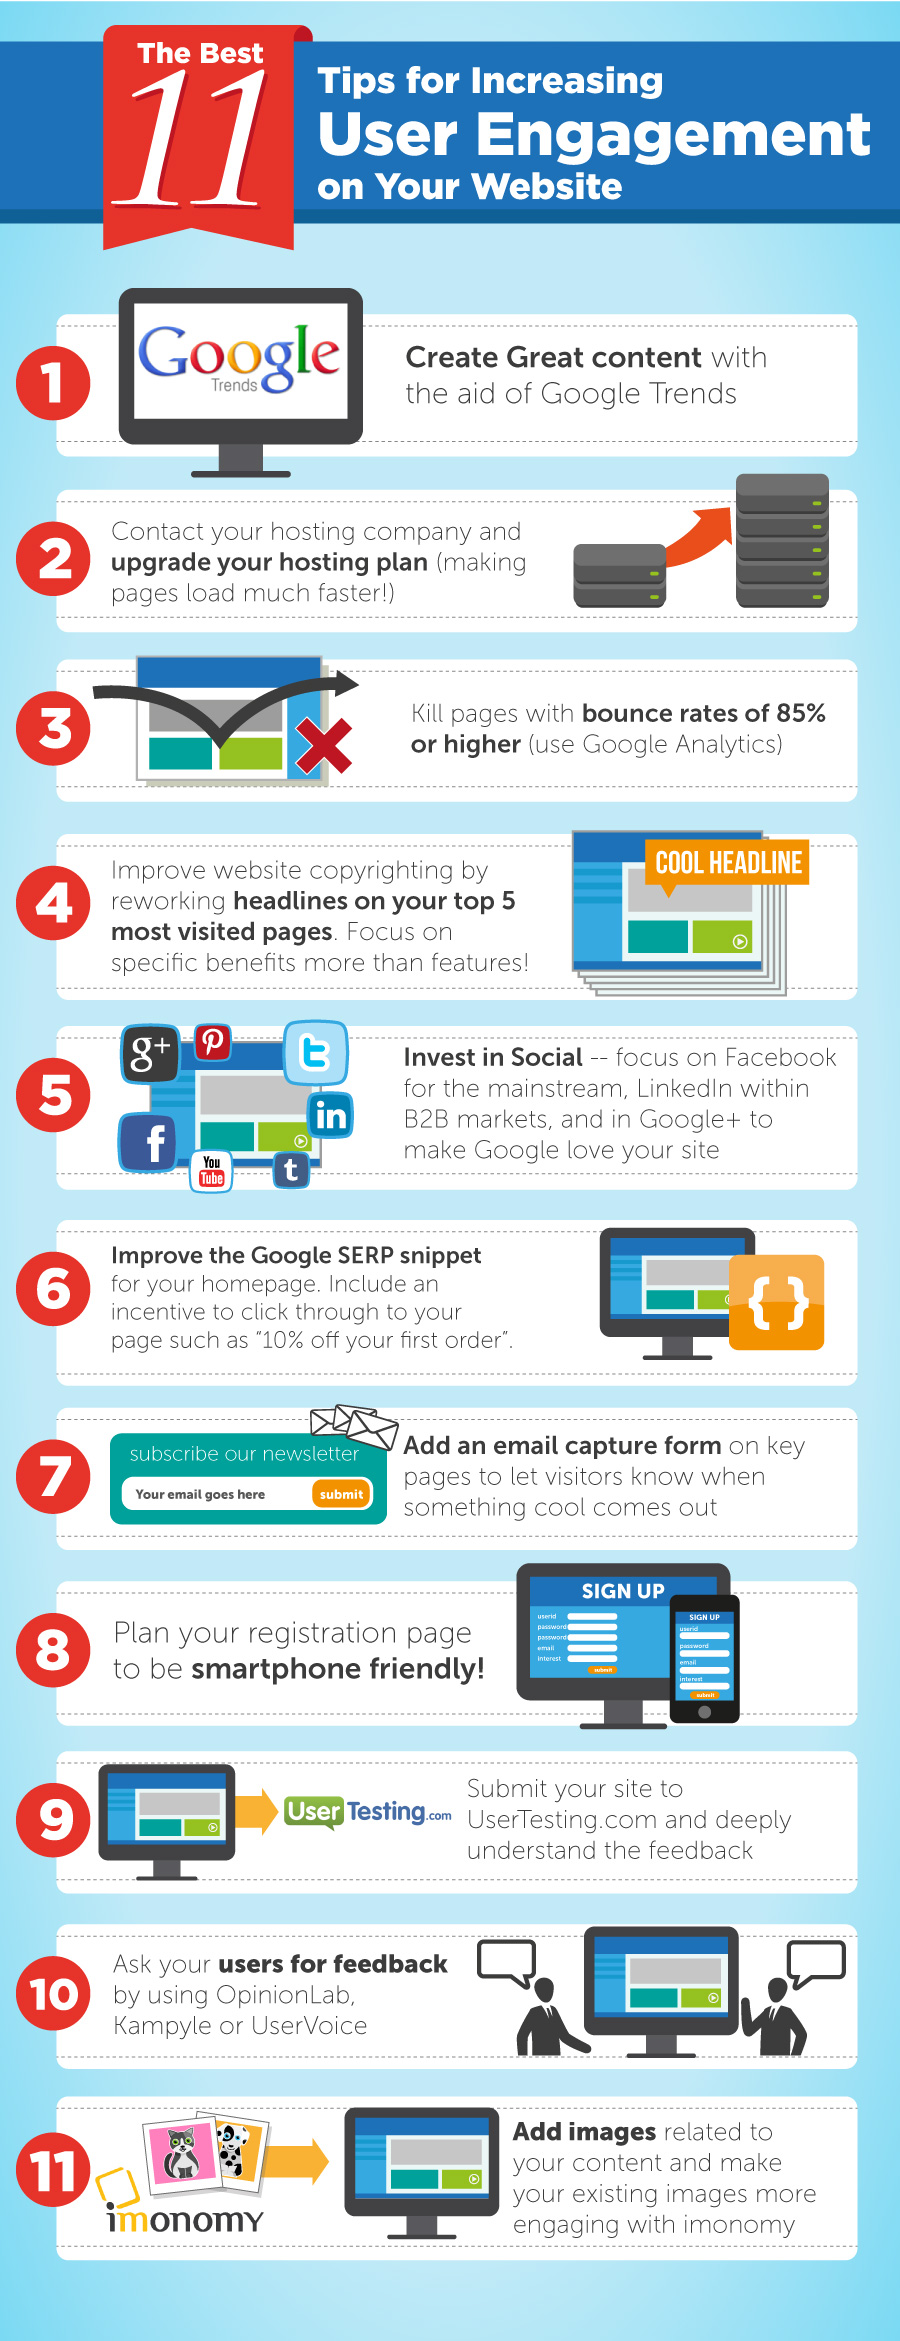 11-Tips-For-Increasing-User-Engagement-On-Your-Website-Infographic.jpg